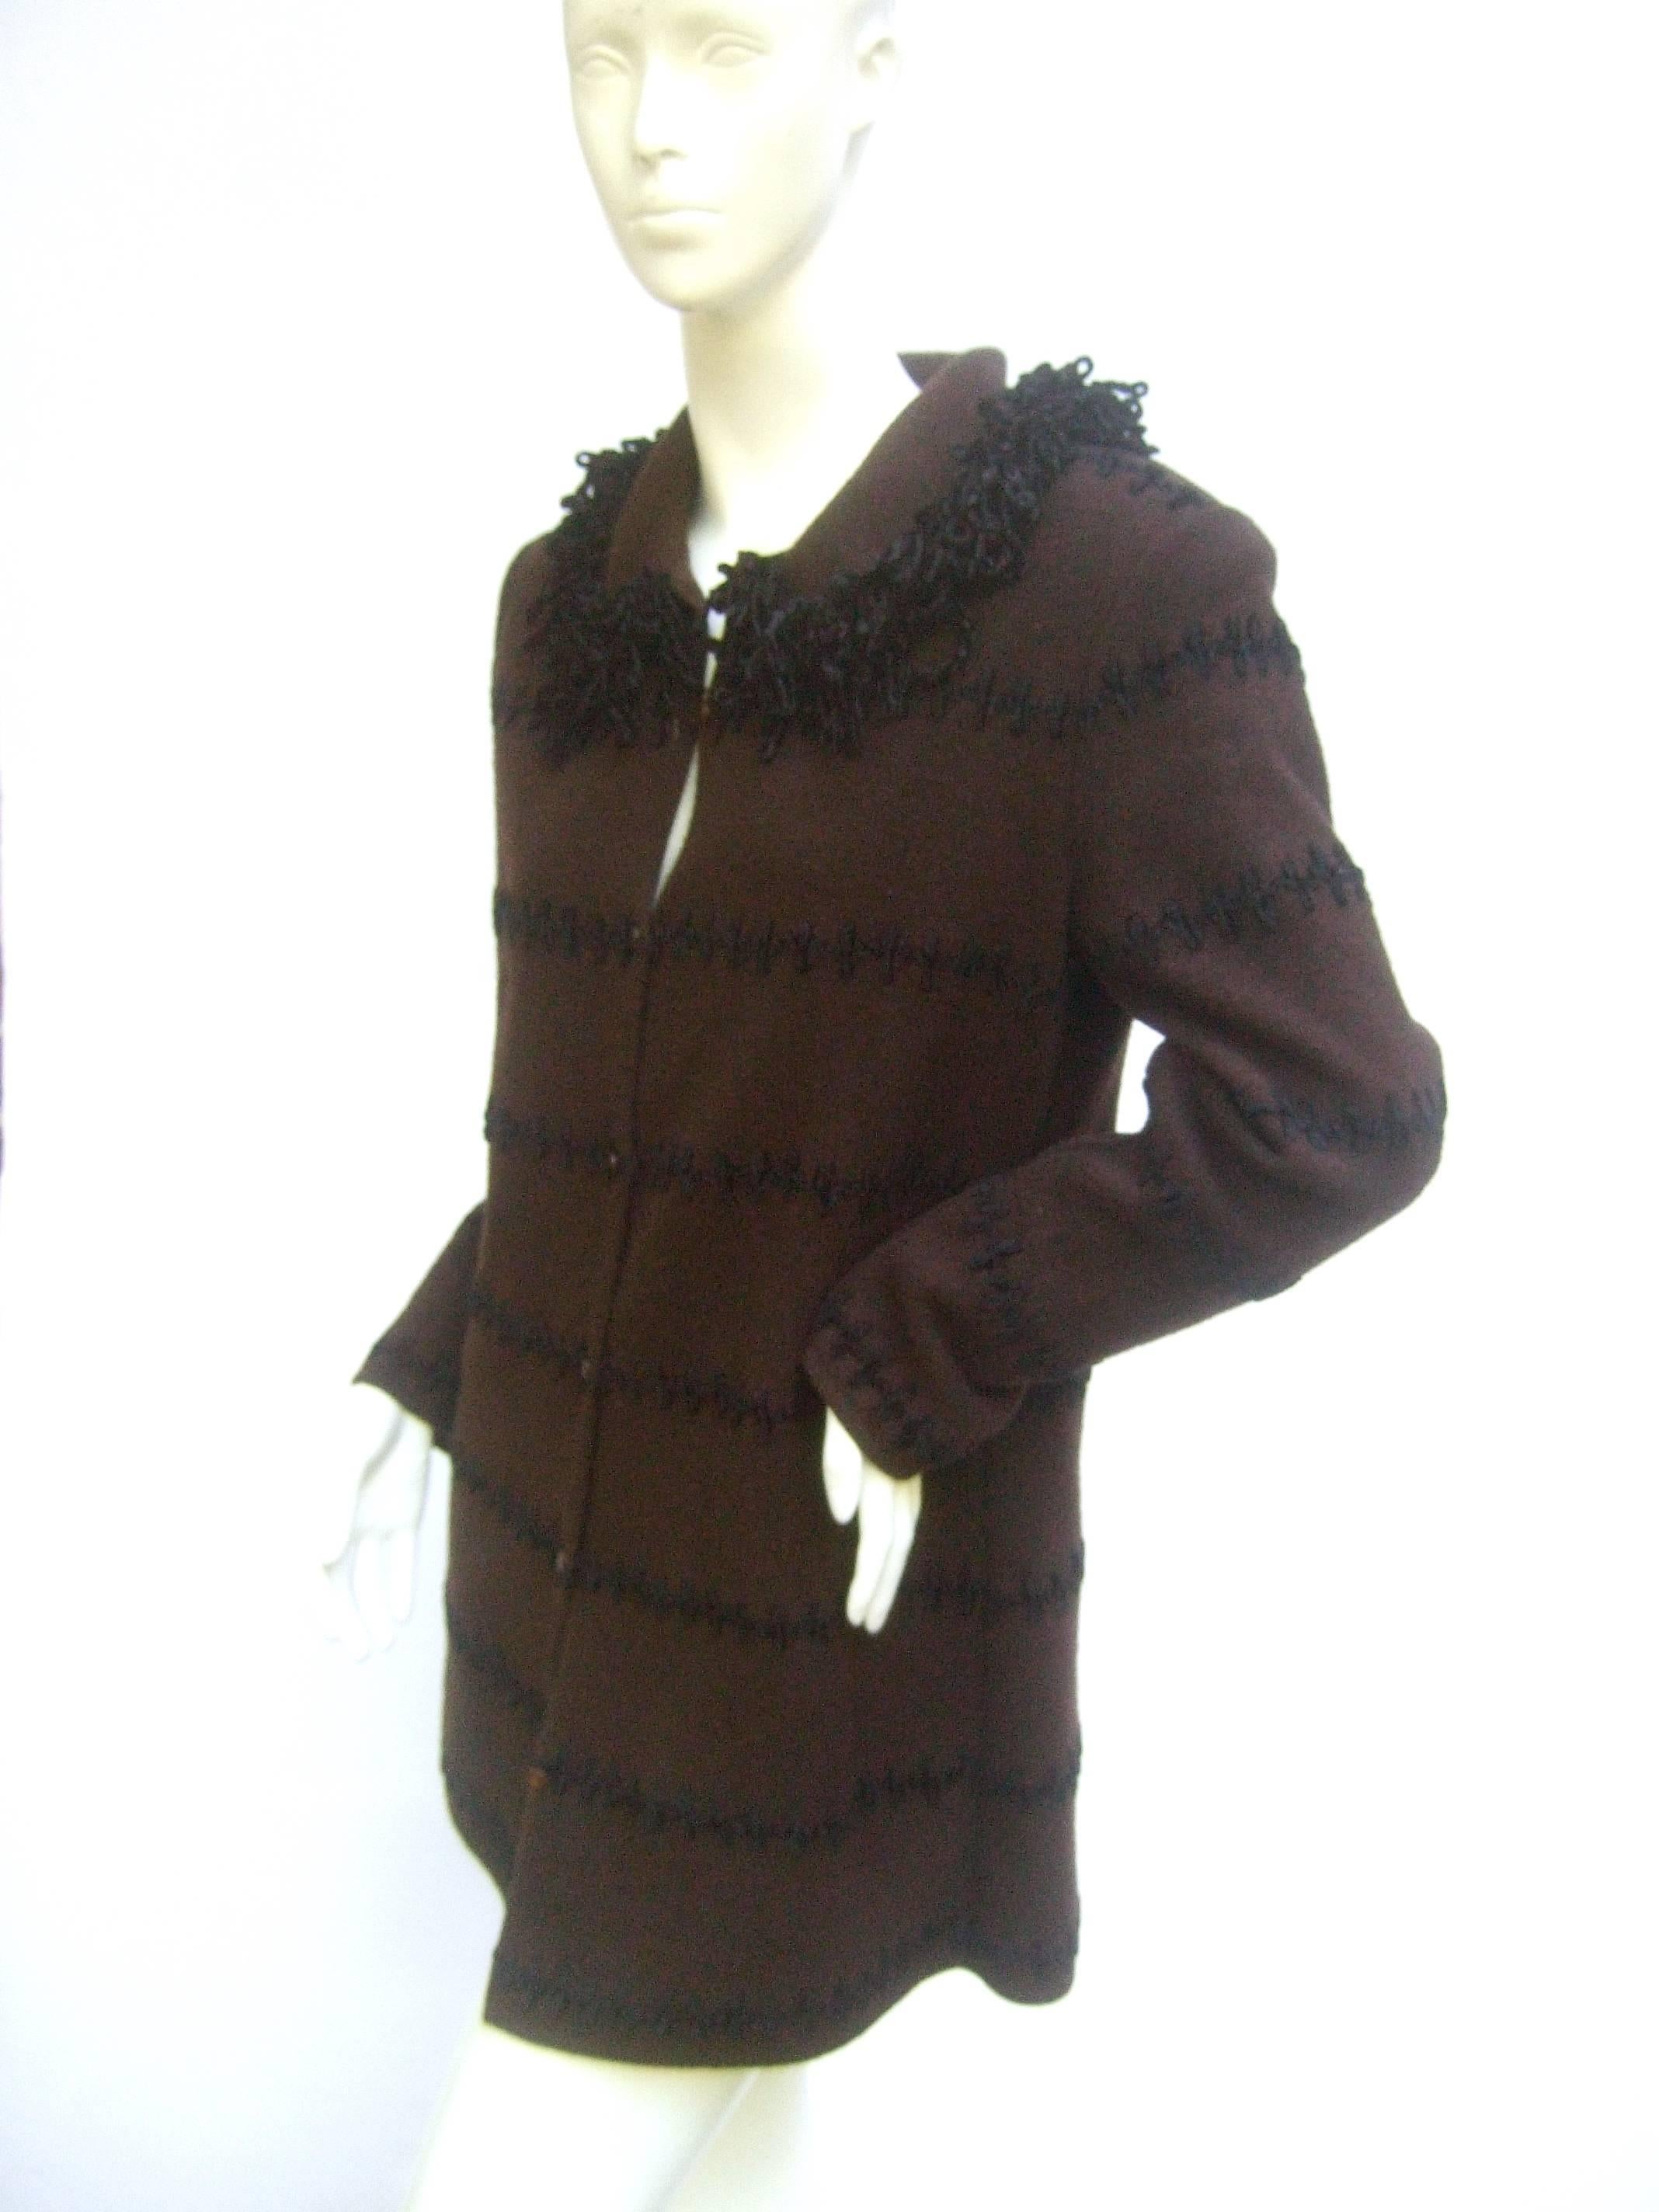 Fendi Italy Chocloate Brown Cardigan Sweater c 1990s  In Good Condition For Sale In University City, MO